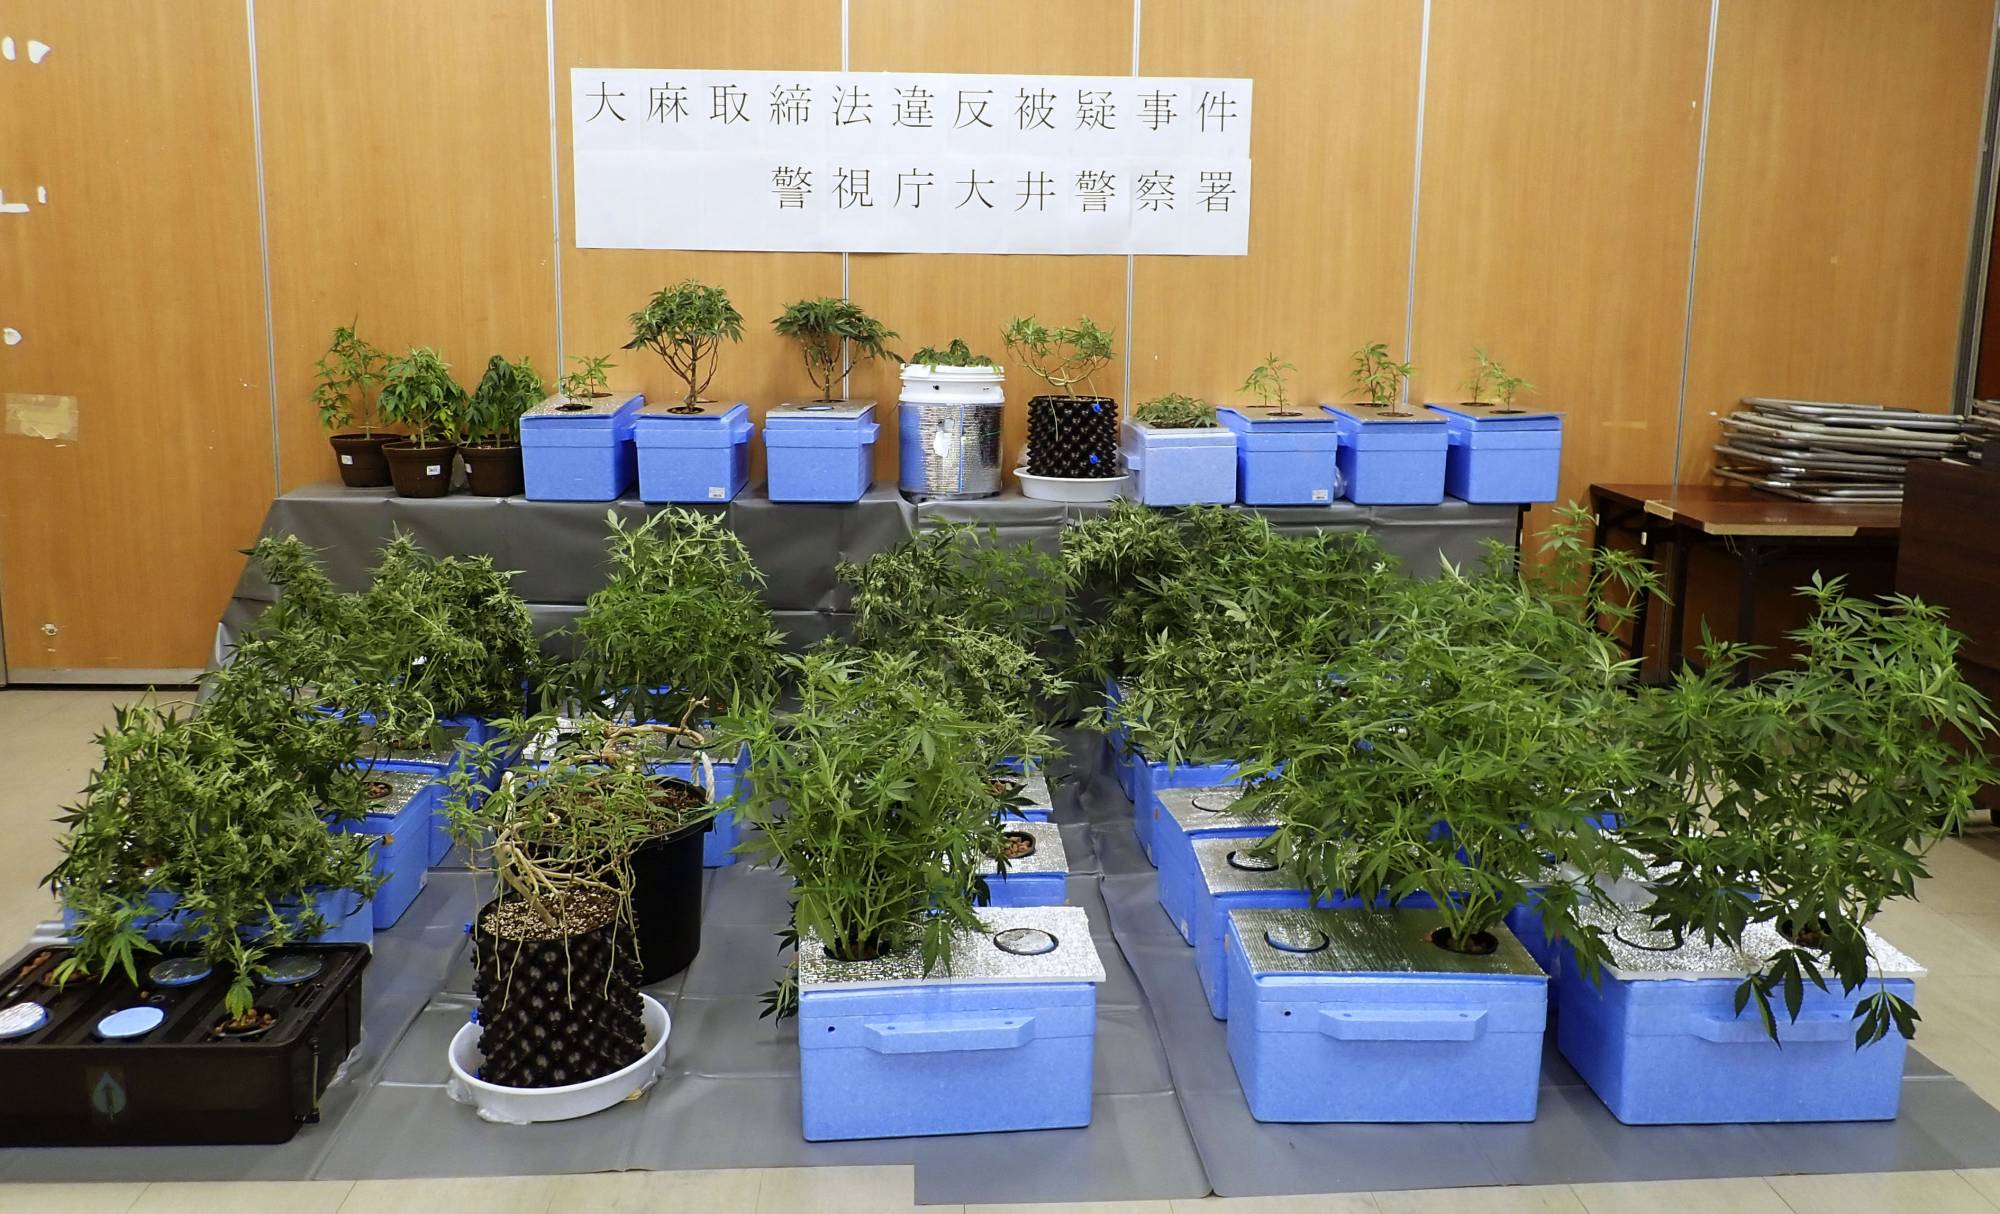 Japanese Police Enlist Video Game Lawyer To Fight Youth Marijuana Use